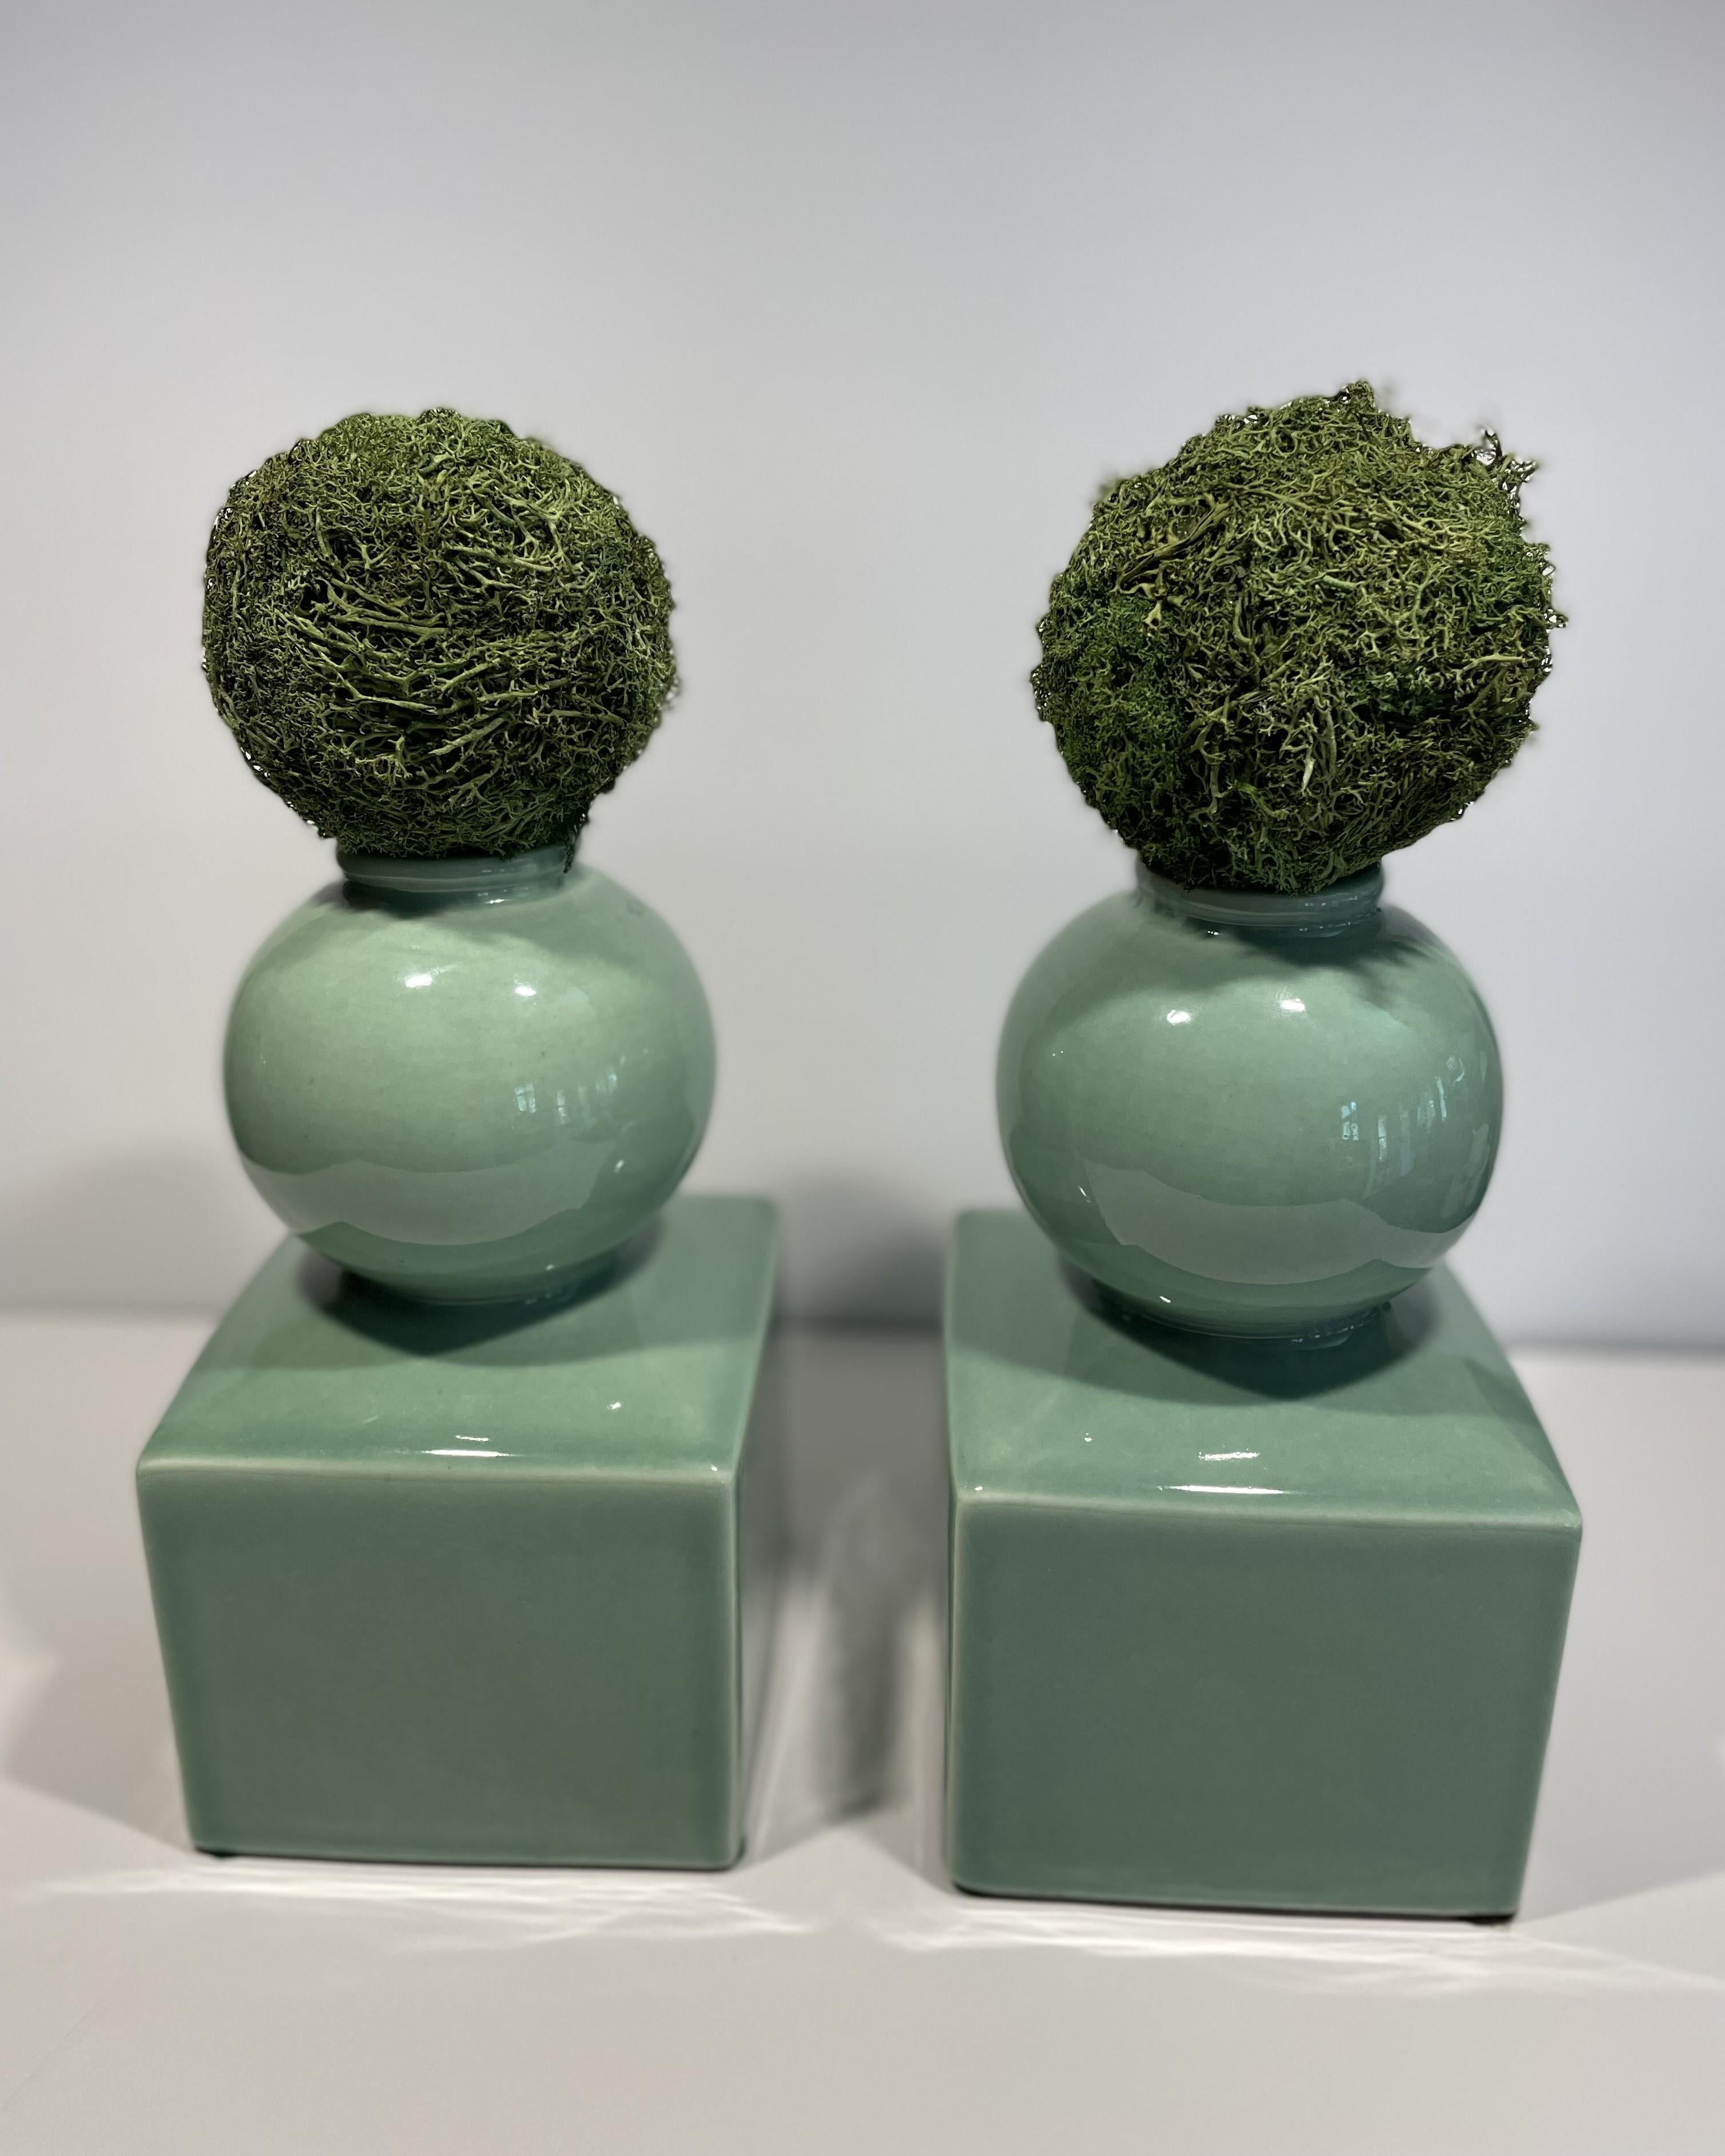 Celadon Ceramic Vases or Bookends Attributed to Serena & Lily -- A Pair For Sale 4